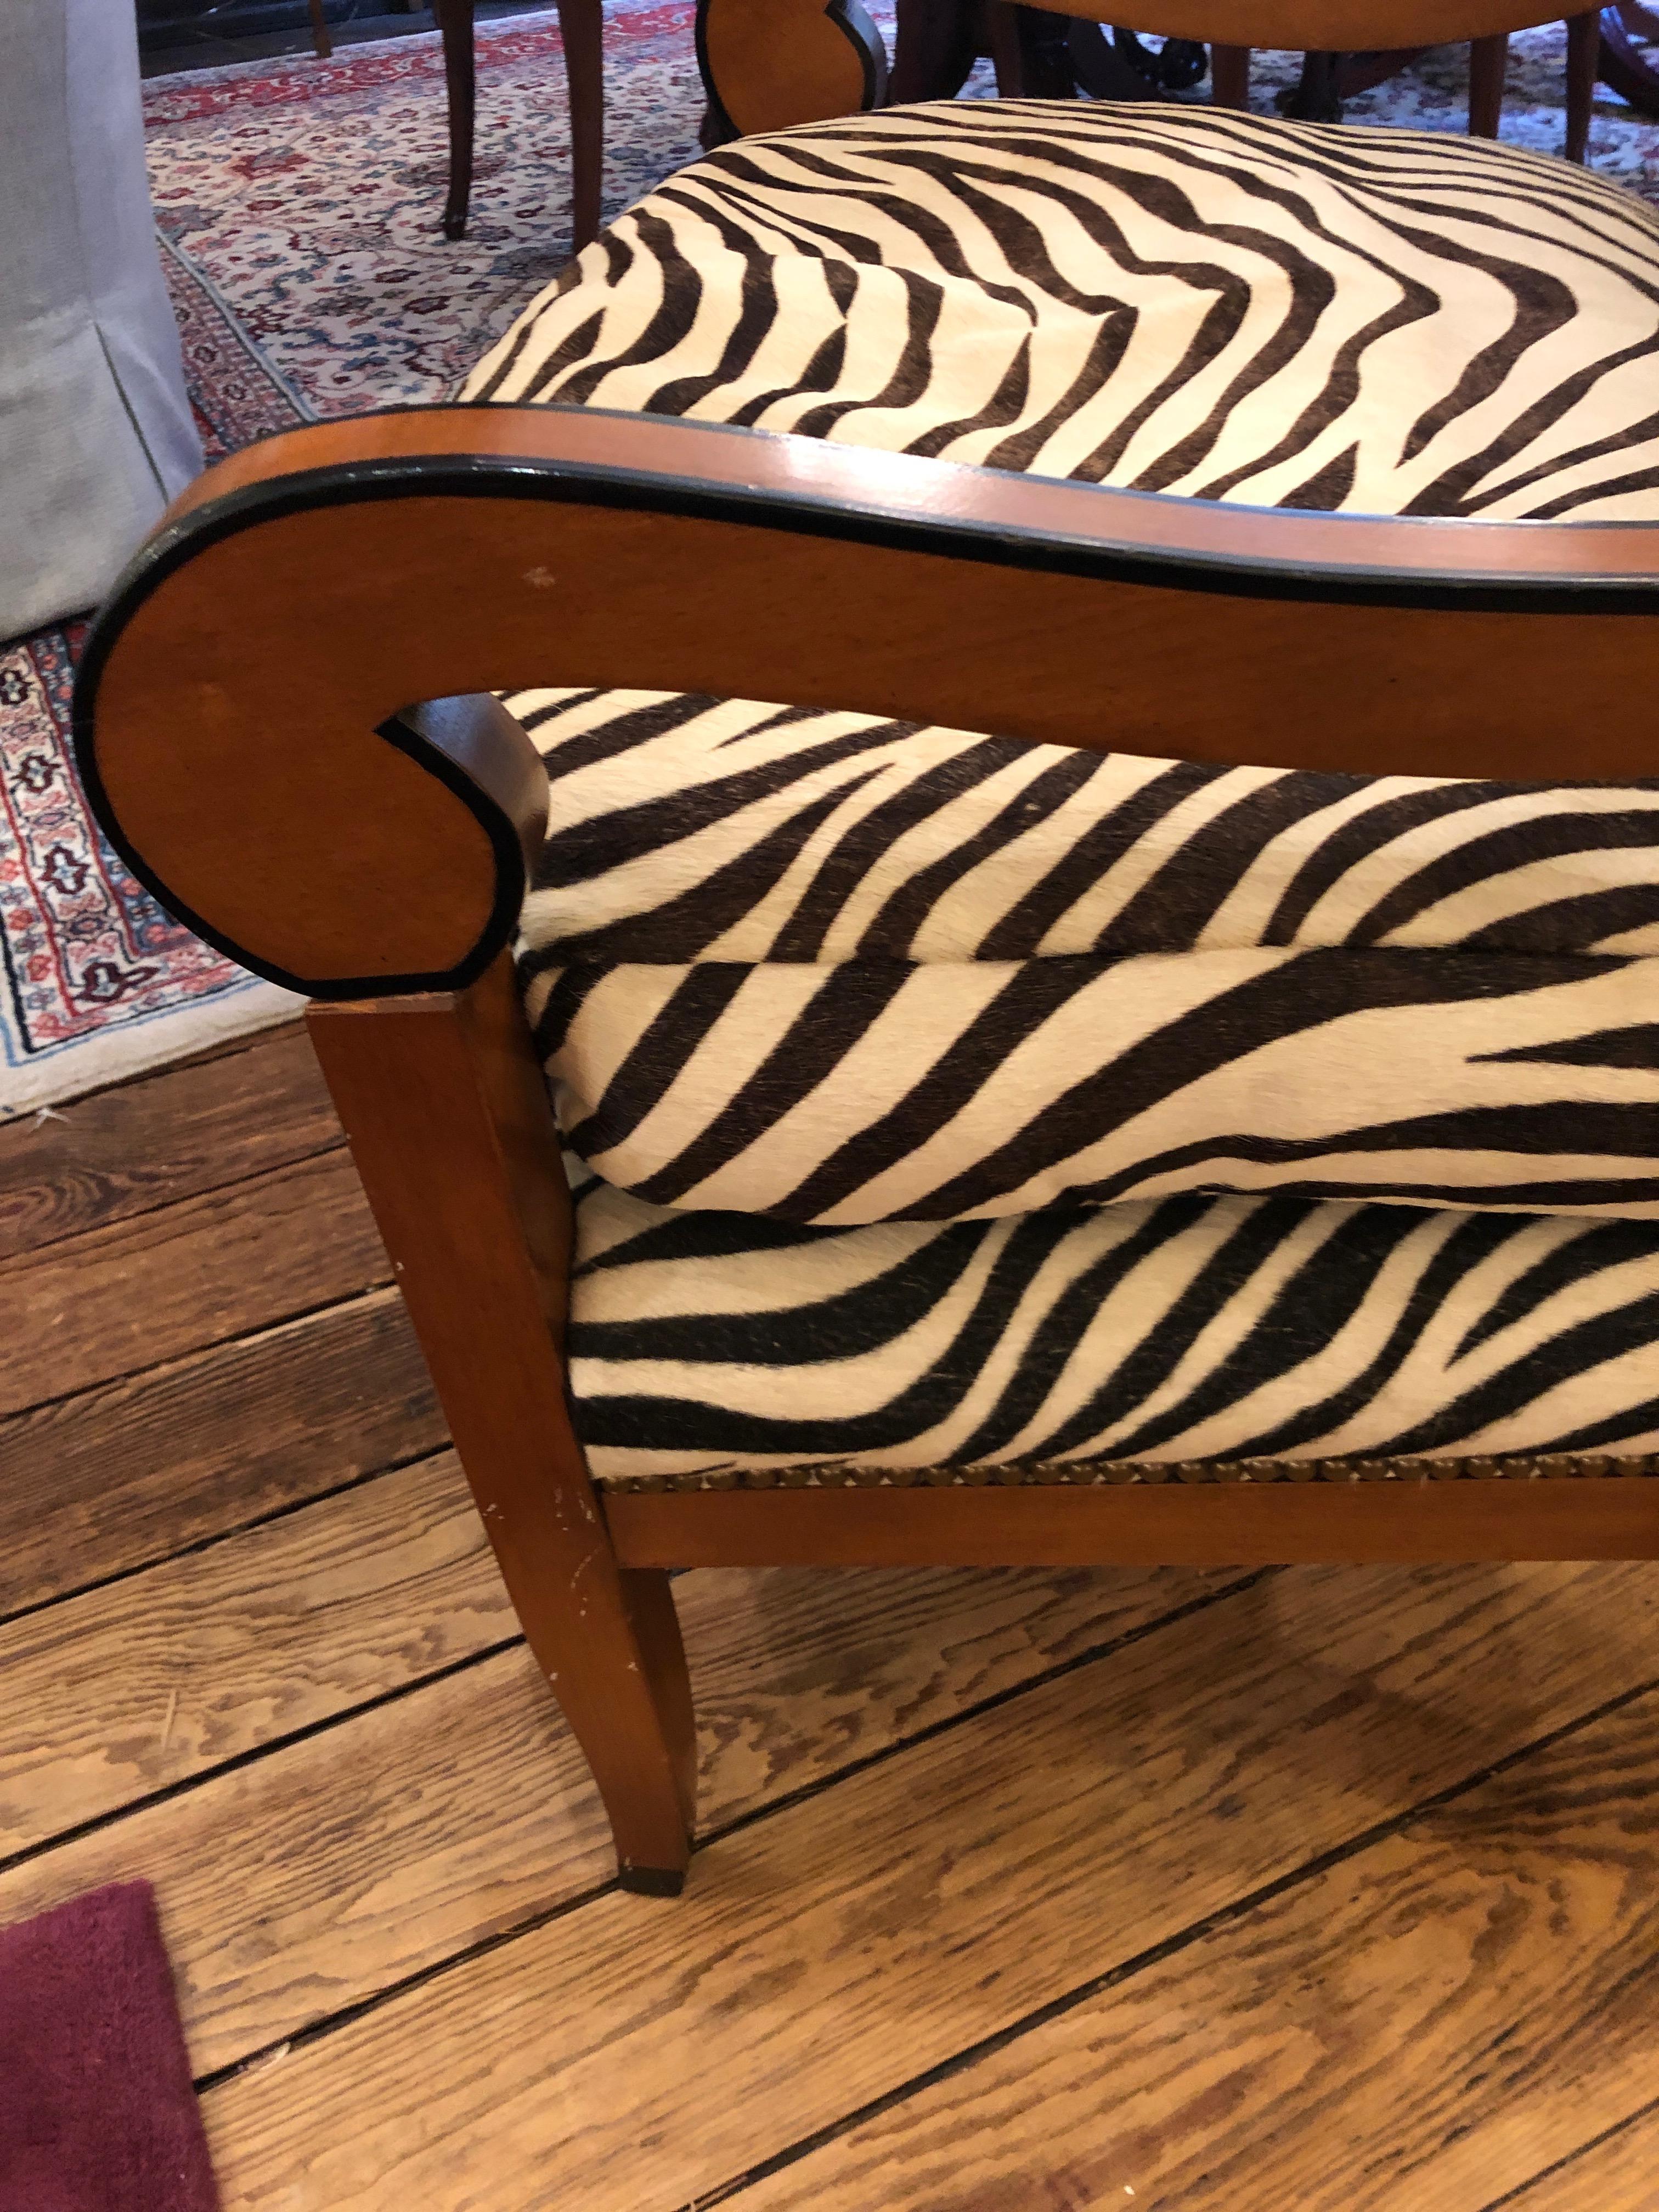 Superbly Stylish Club Chair with Printed Zebra Cowhide Upholstery 1